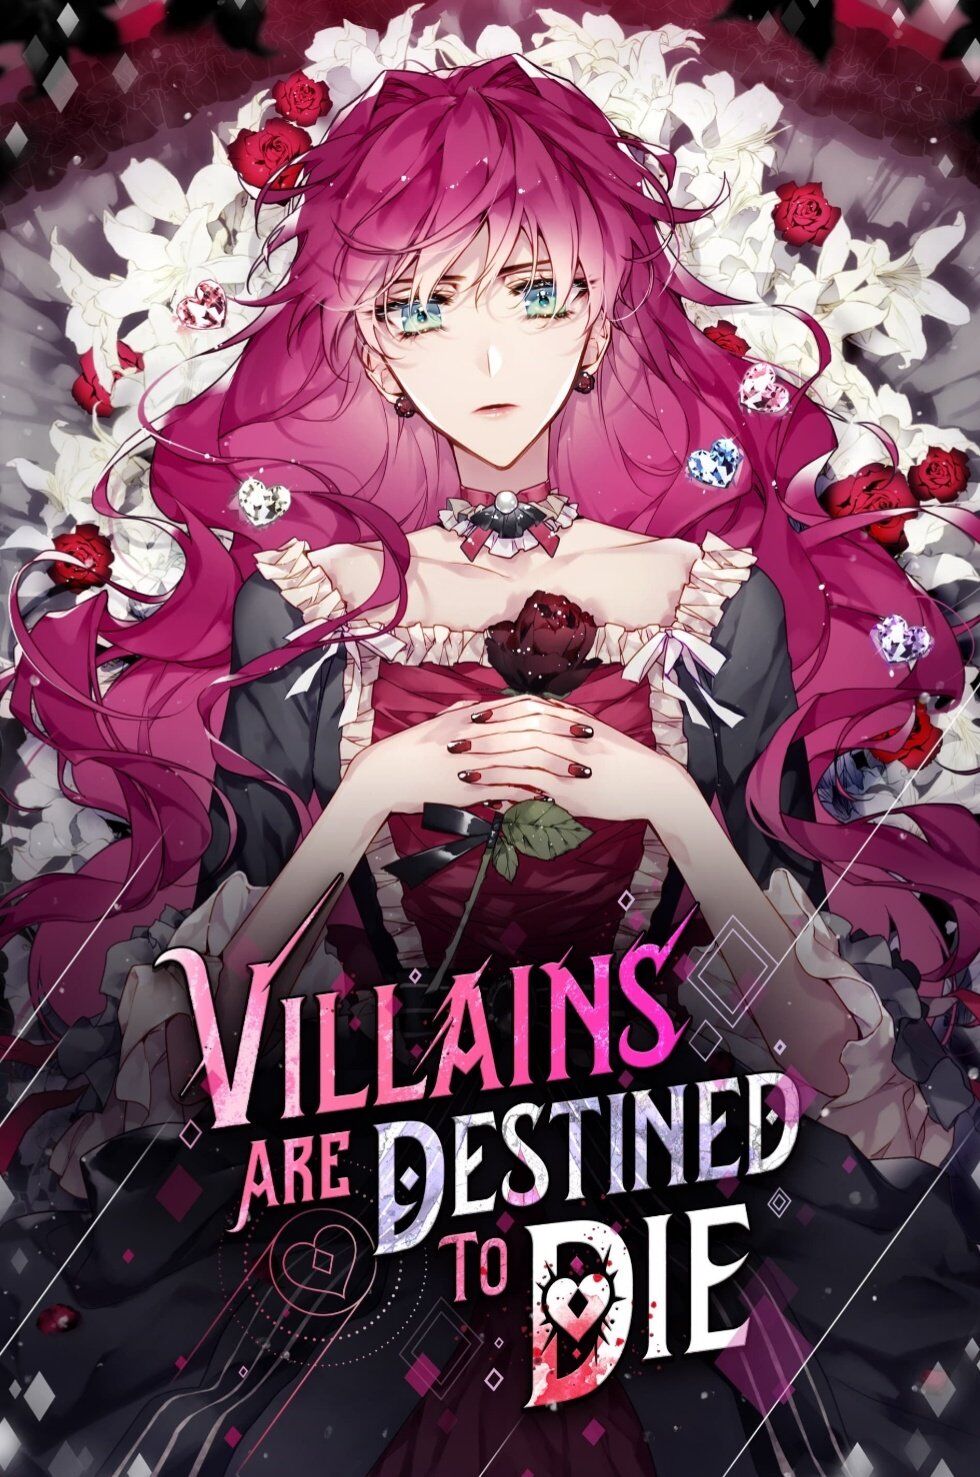 Death is the only ending for the villainess